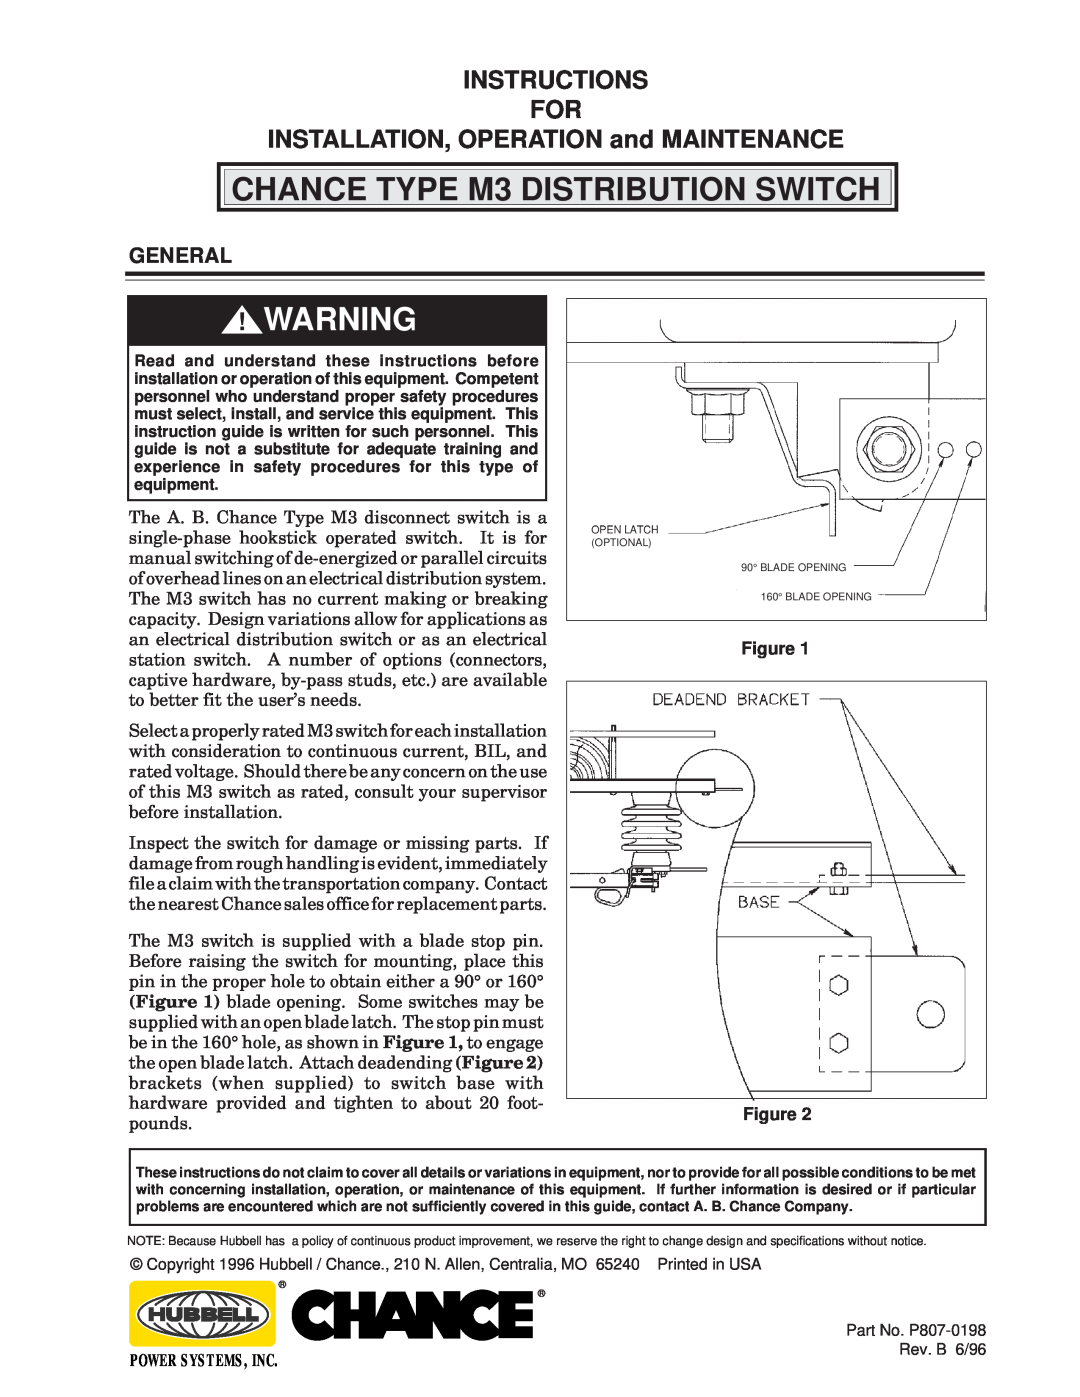 Hubbell specifications General, Power Systems, Inc, CHANCE TYPE M3 DISTRIBUTION SWITCH 